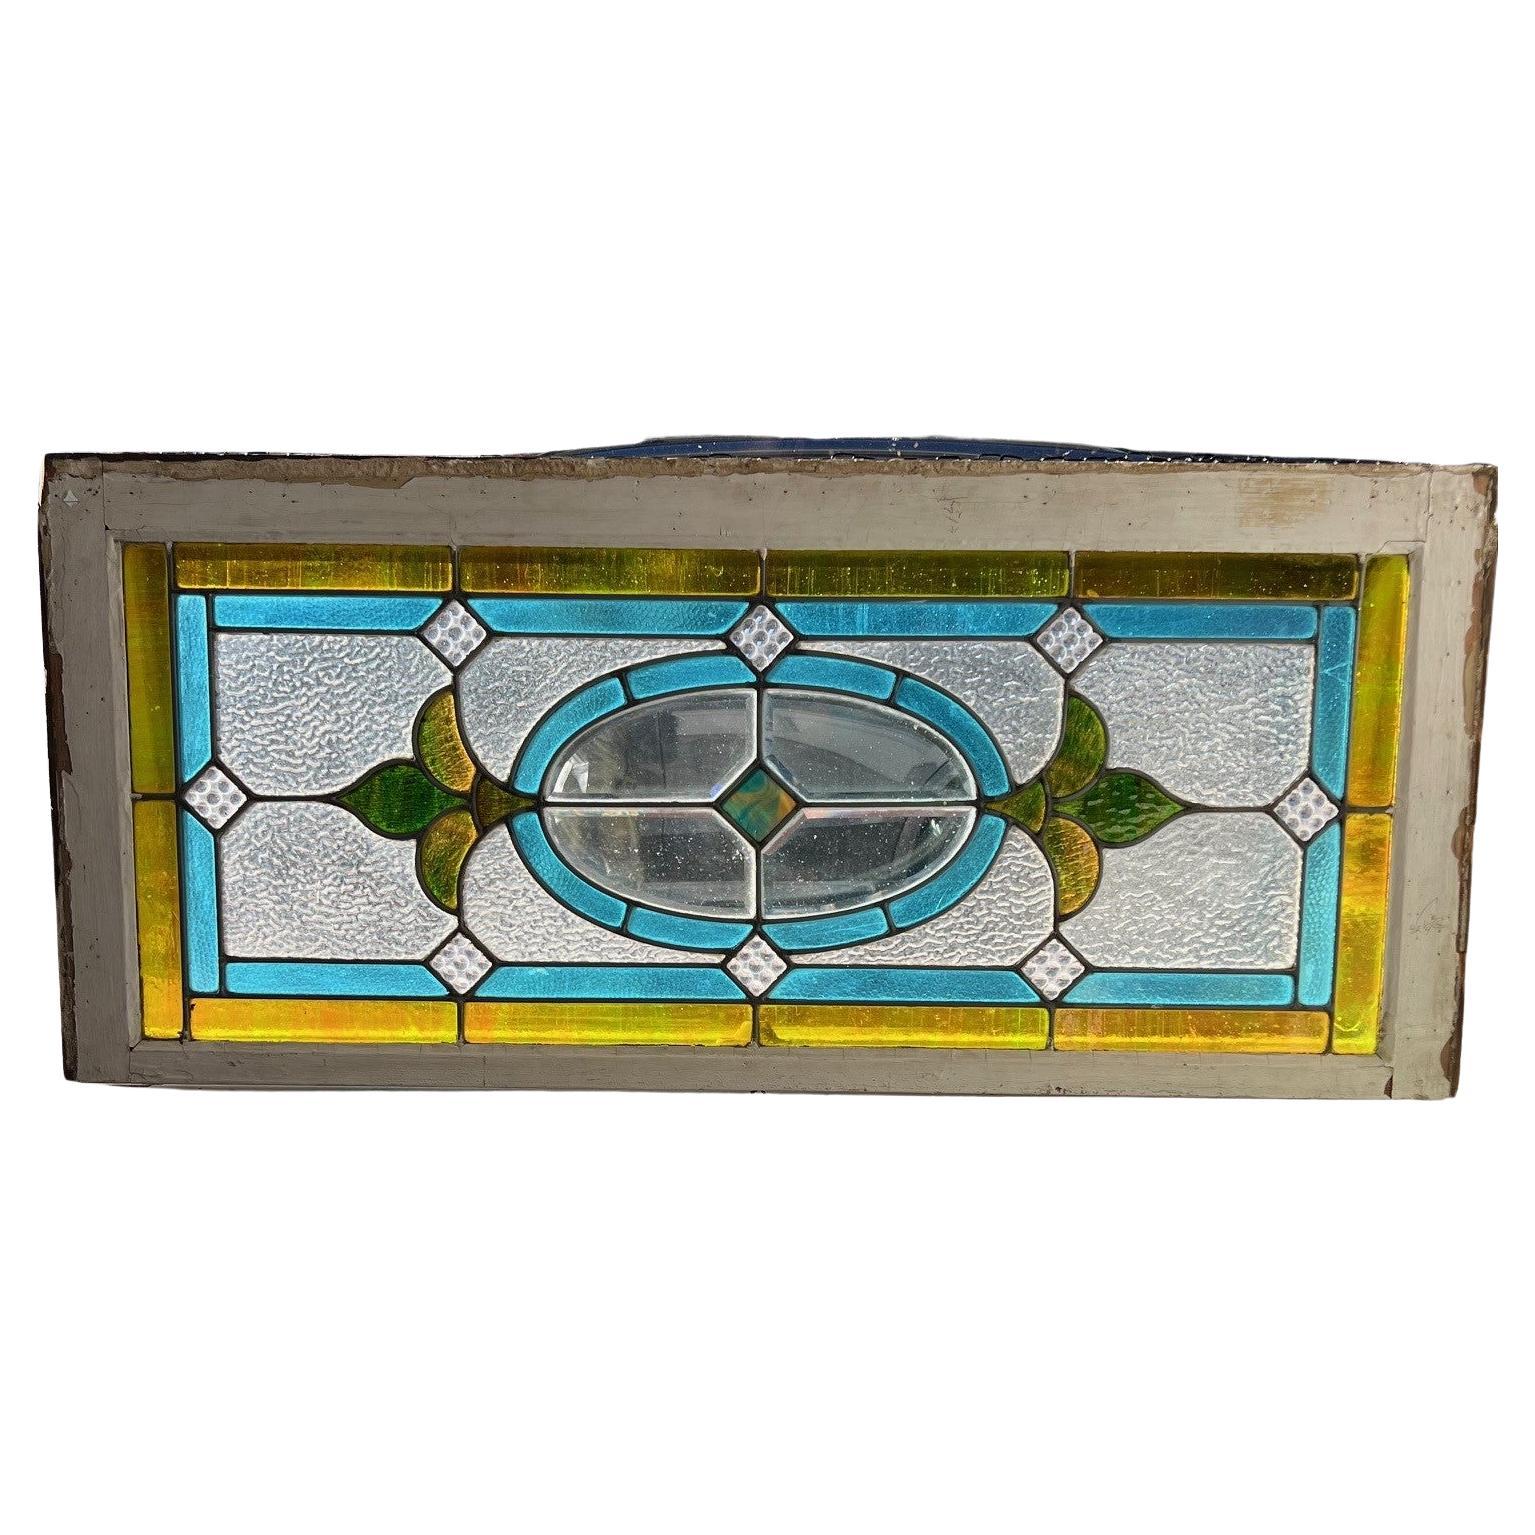 Antique Stained Glass Window, Beveled Glass Center Original Wood Frame